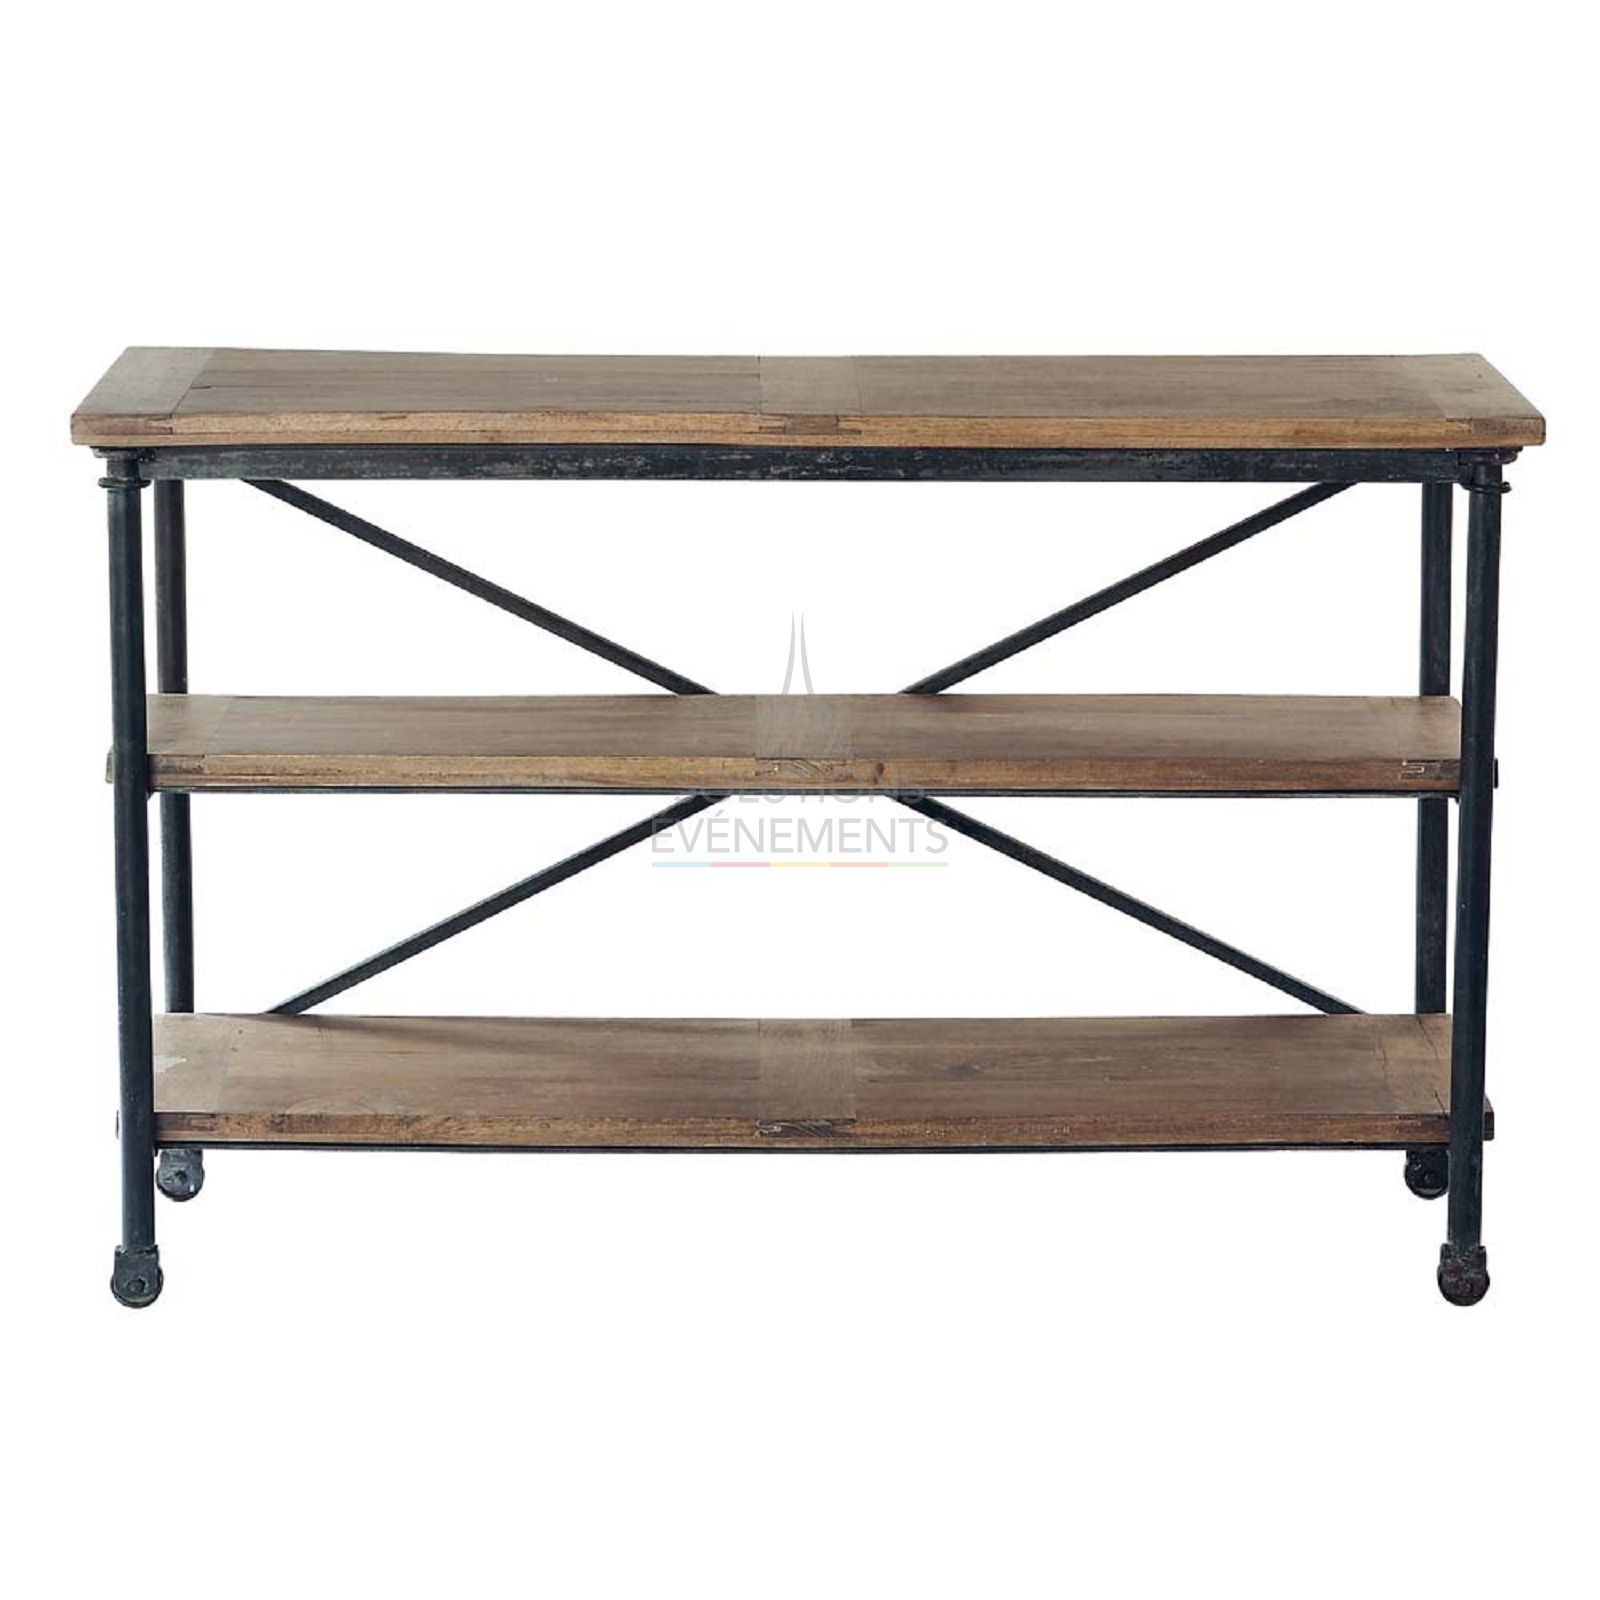 Rental of wood and metal console